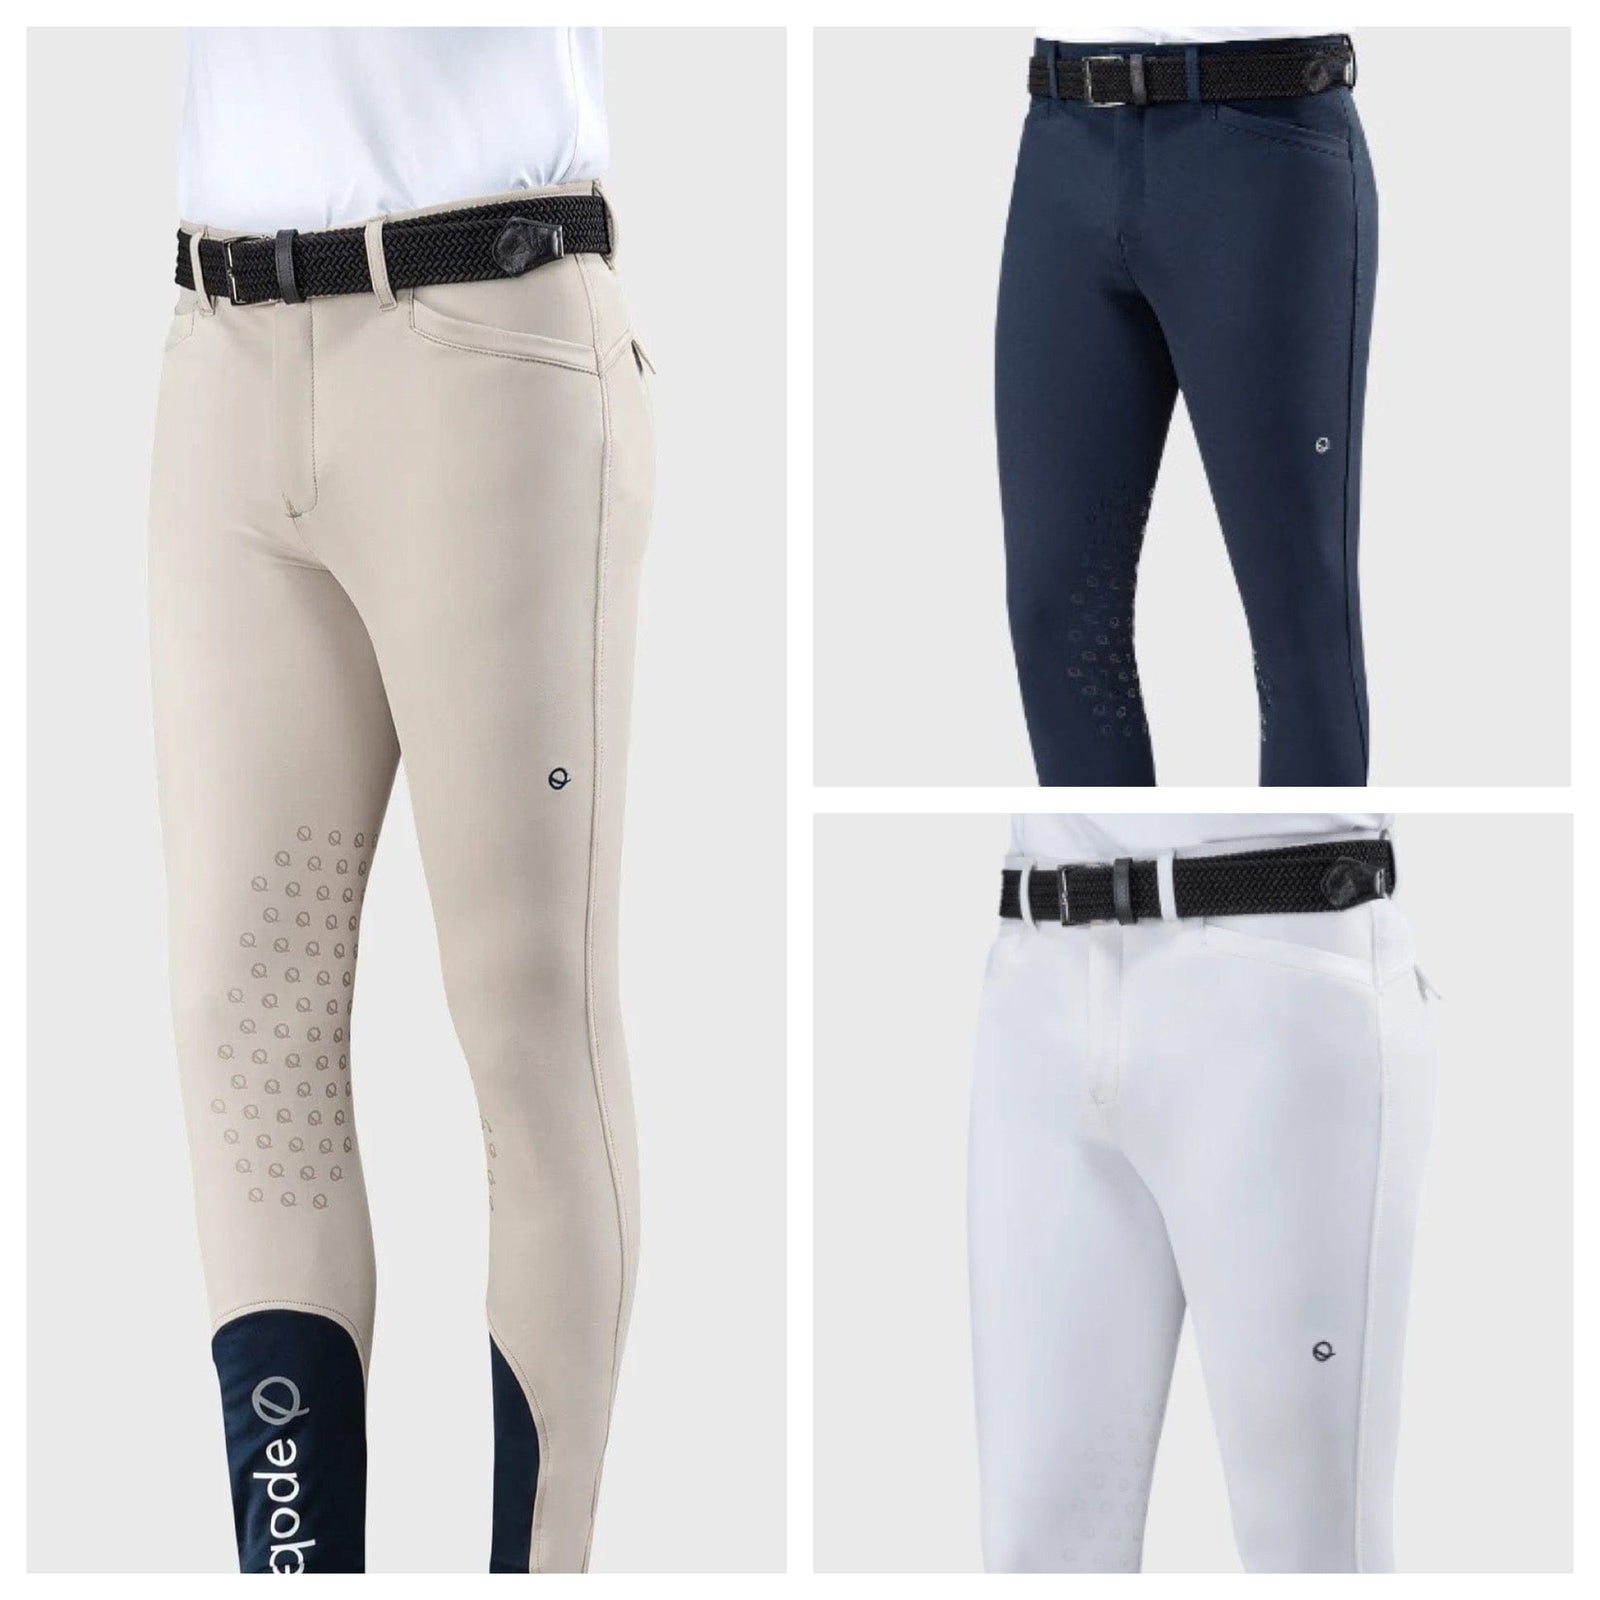 Dynamique Knee Grip Breeches White Outlet